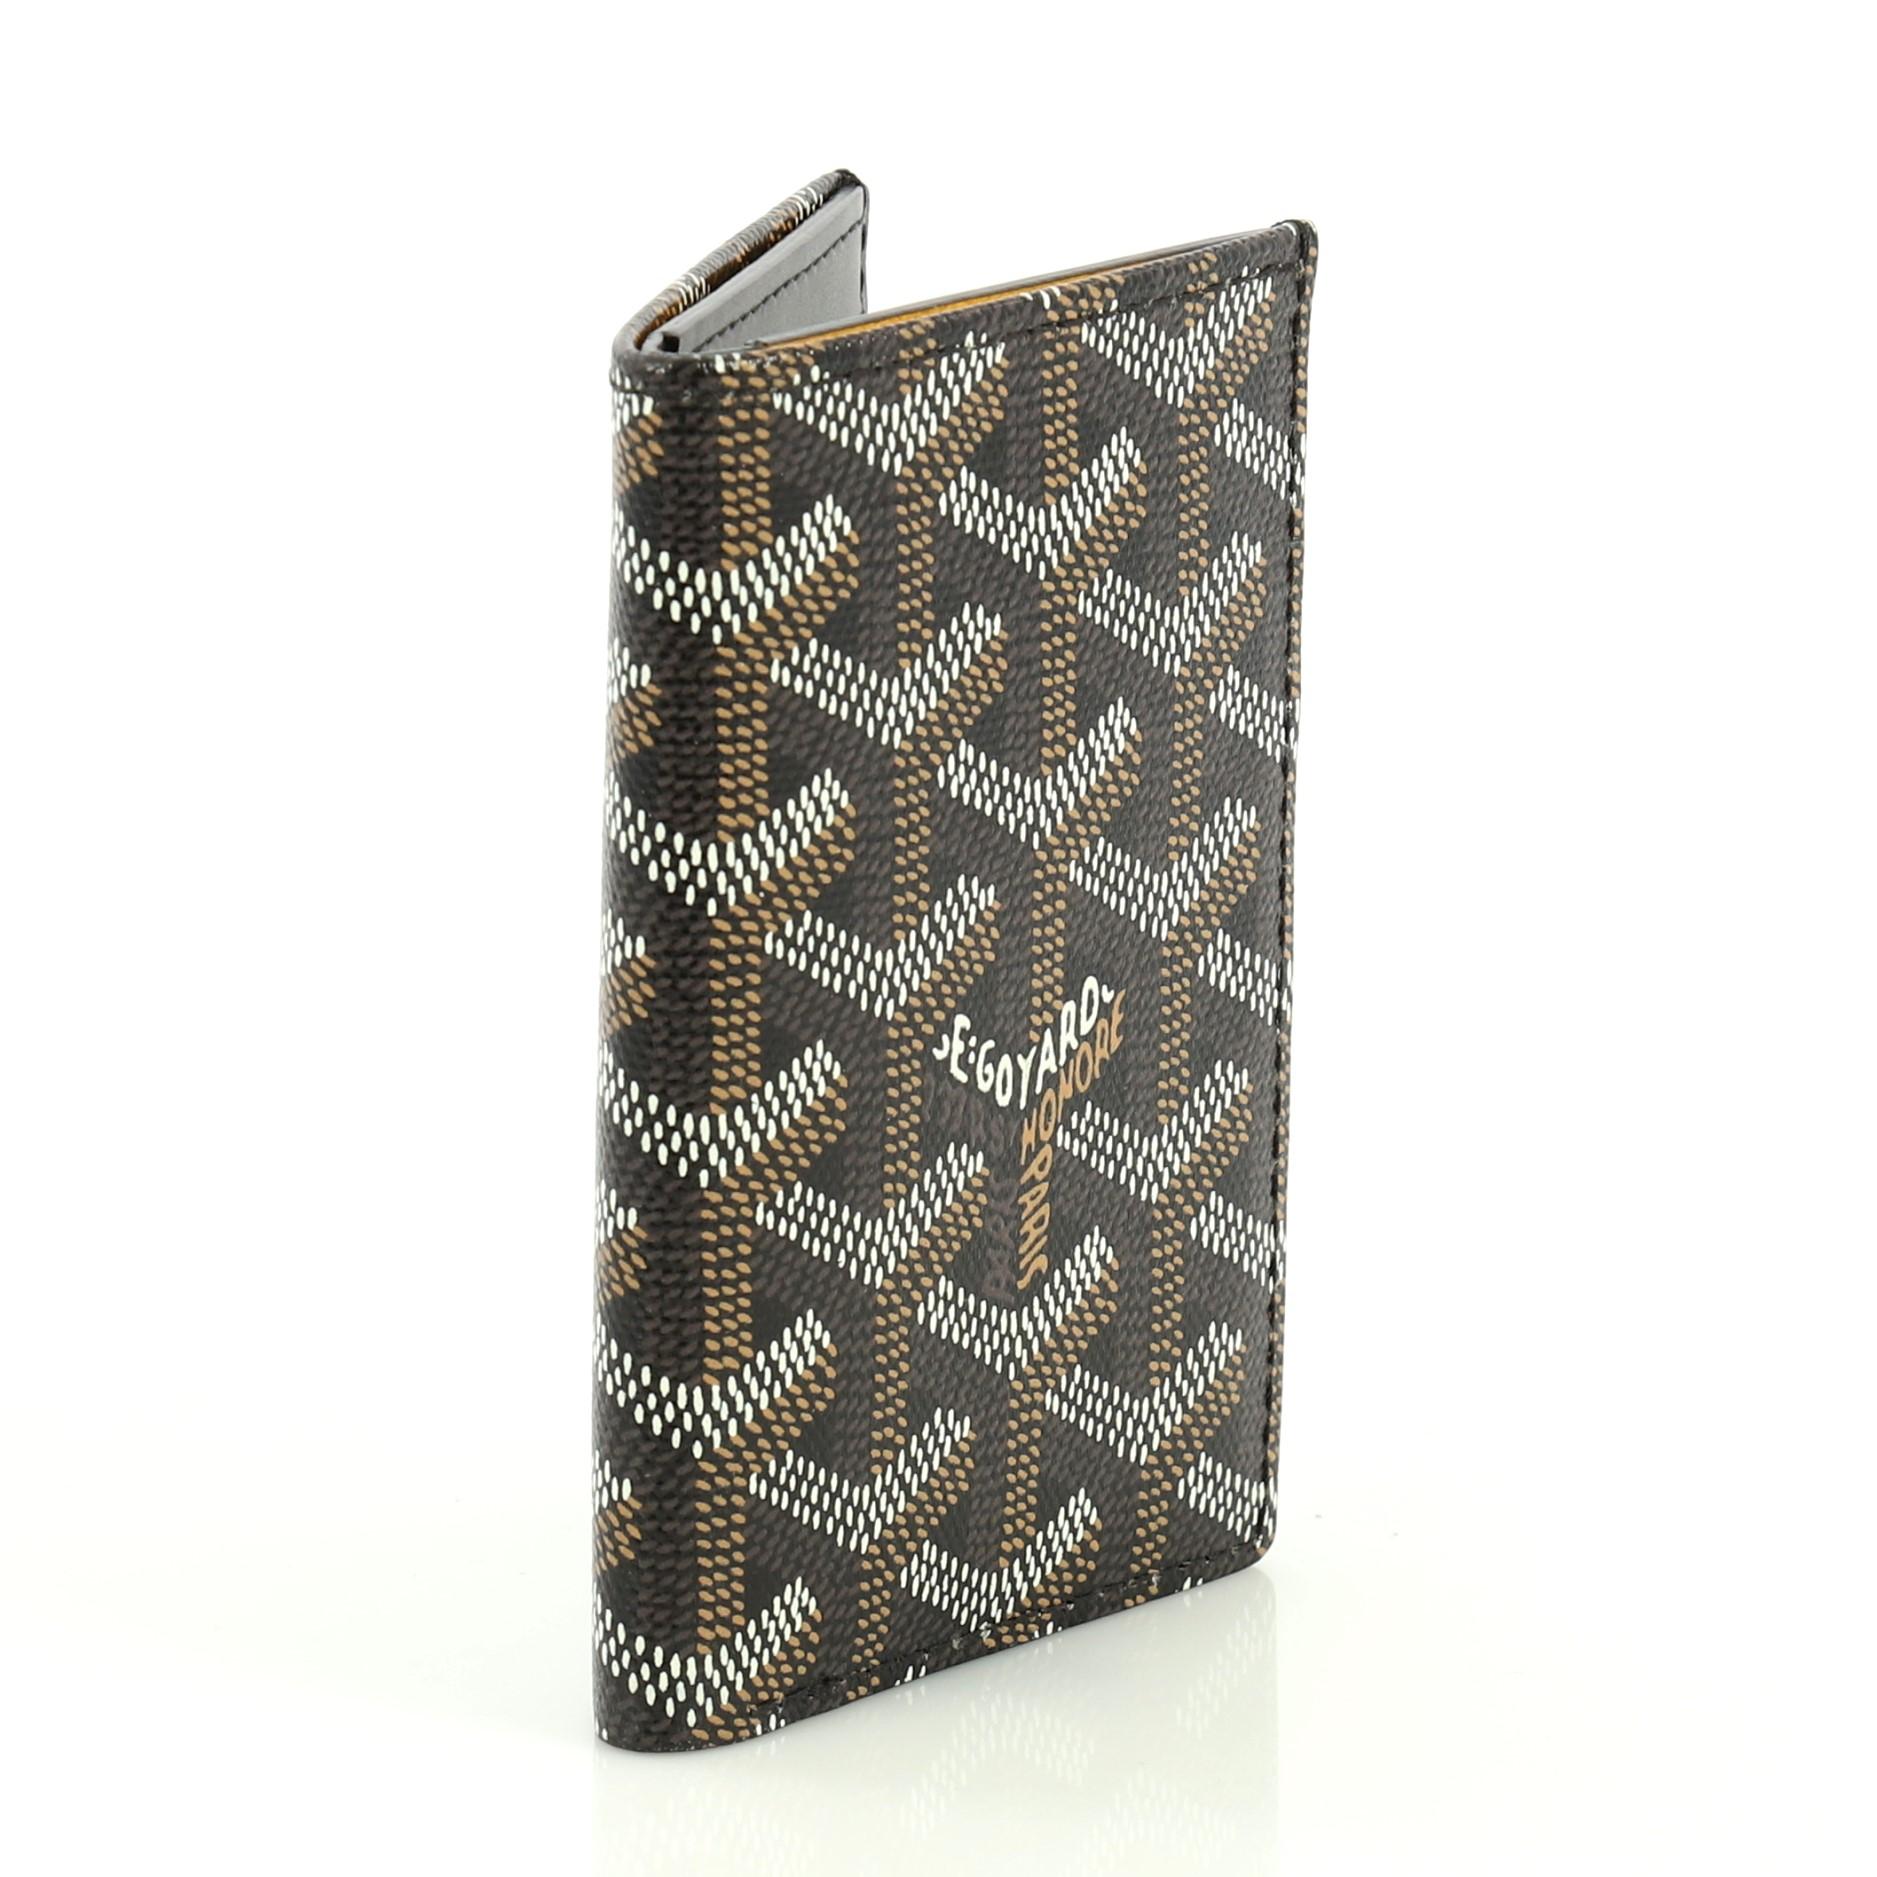 This Goyard Saint Pierre Card Holder Coated Canvas, crafted from brown Goyardine coated canvas. It opens to a black leather interior with multiple card slots, slip pockets and bill compartment. 

Condition: Excellent. Creasing on exterior, light